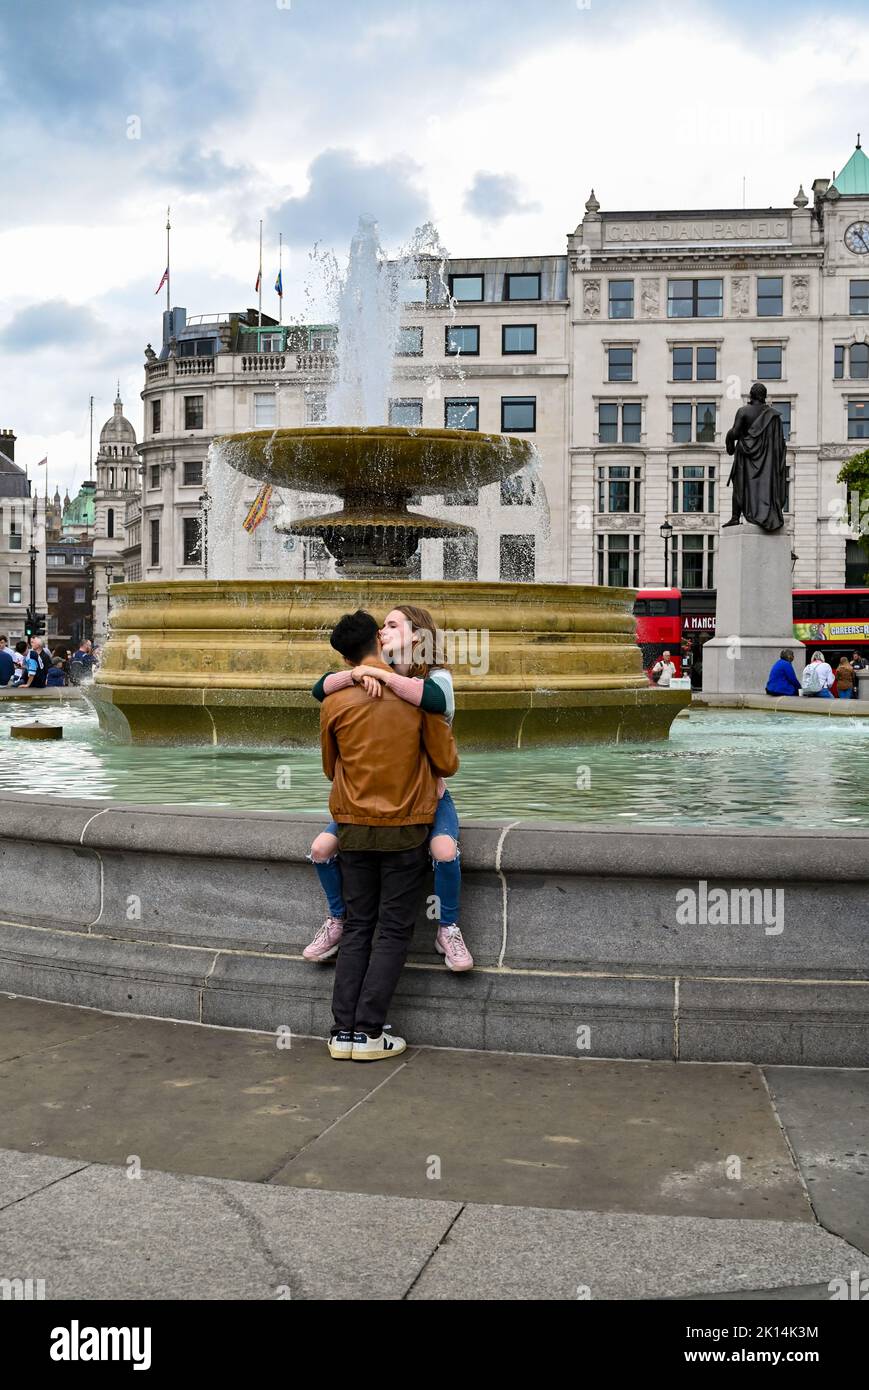 Trafalgar Square London UK - Couple together by one of the fountains in the square  Photograph taken by Simon Dack Stock Photo